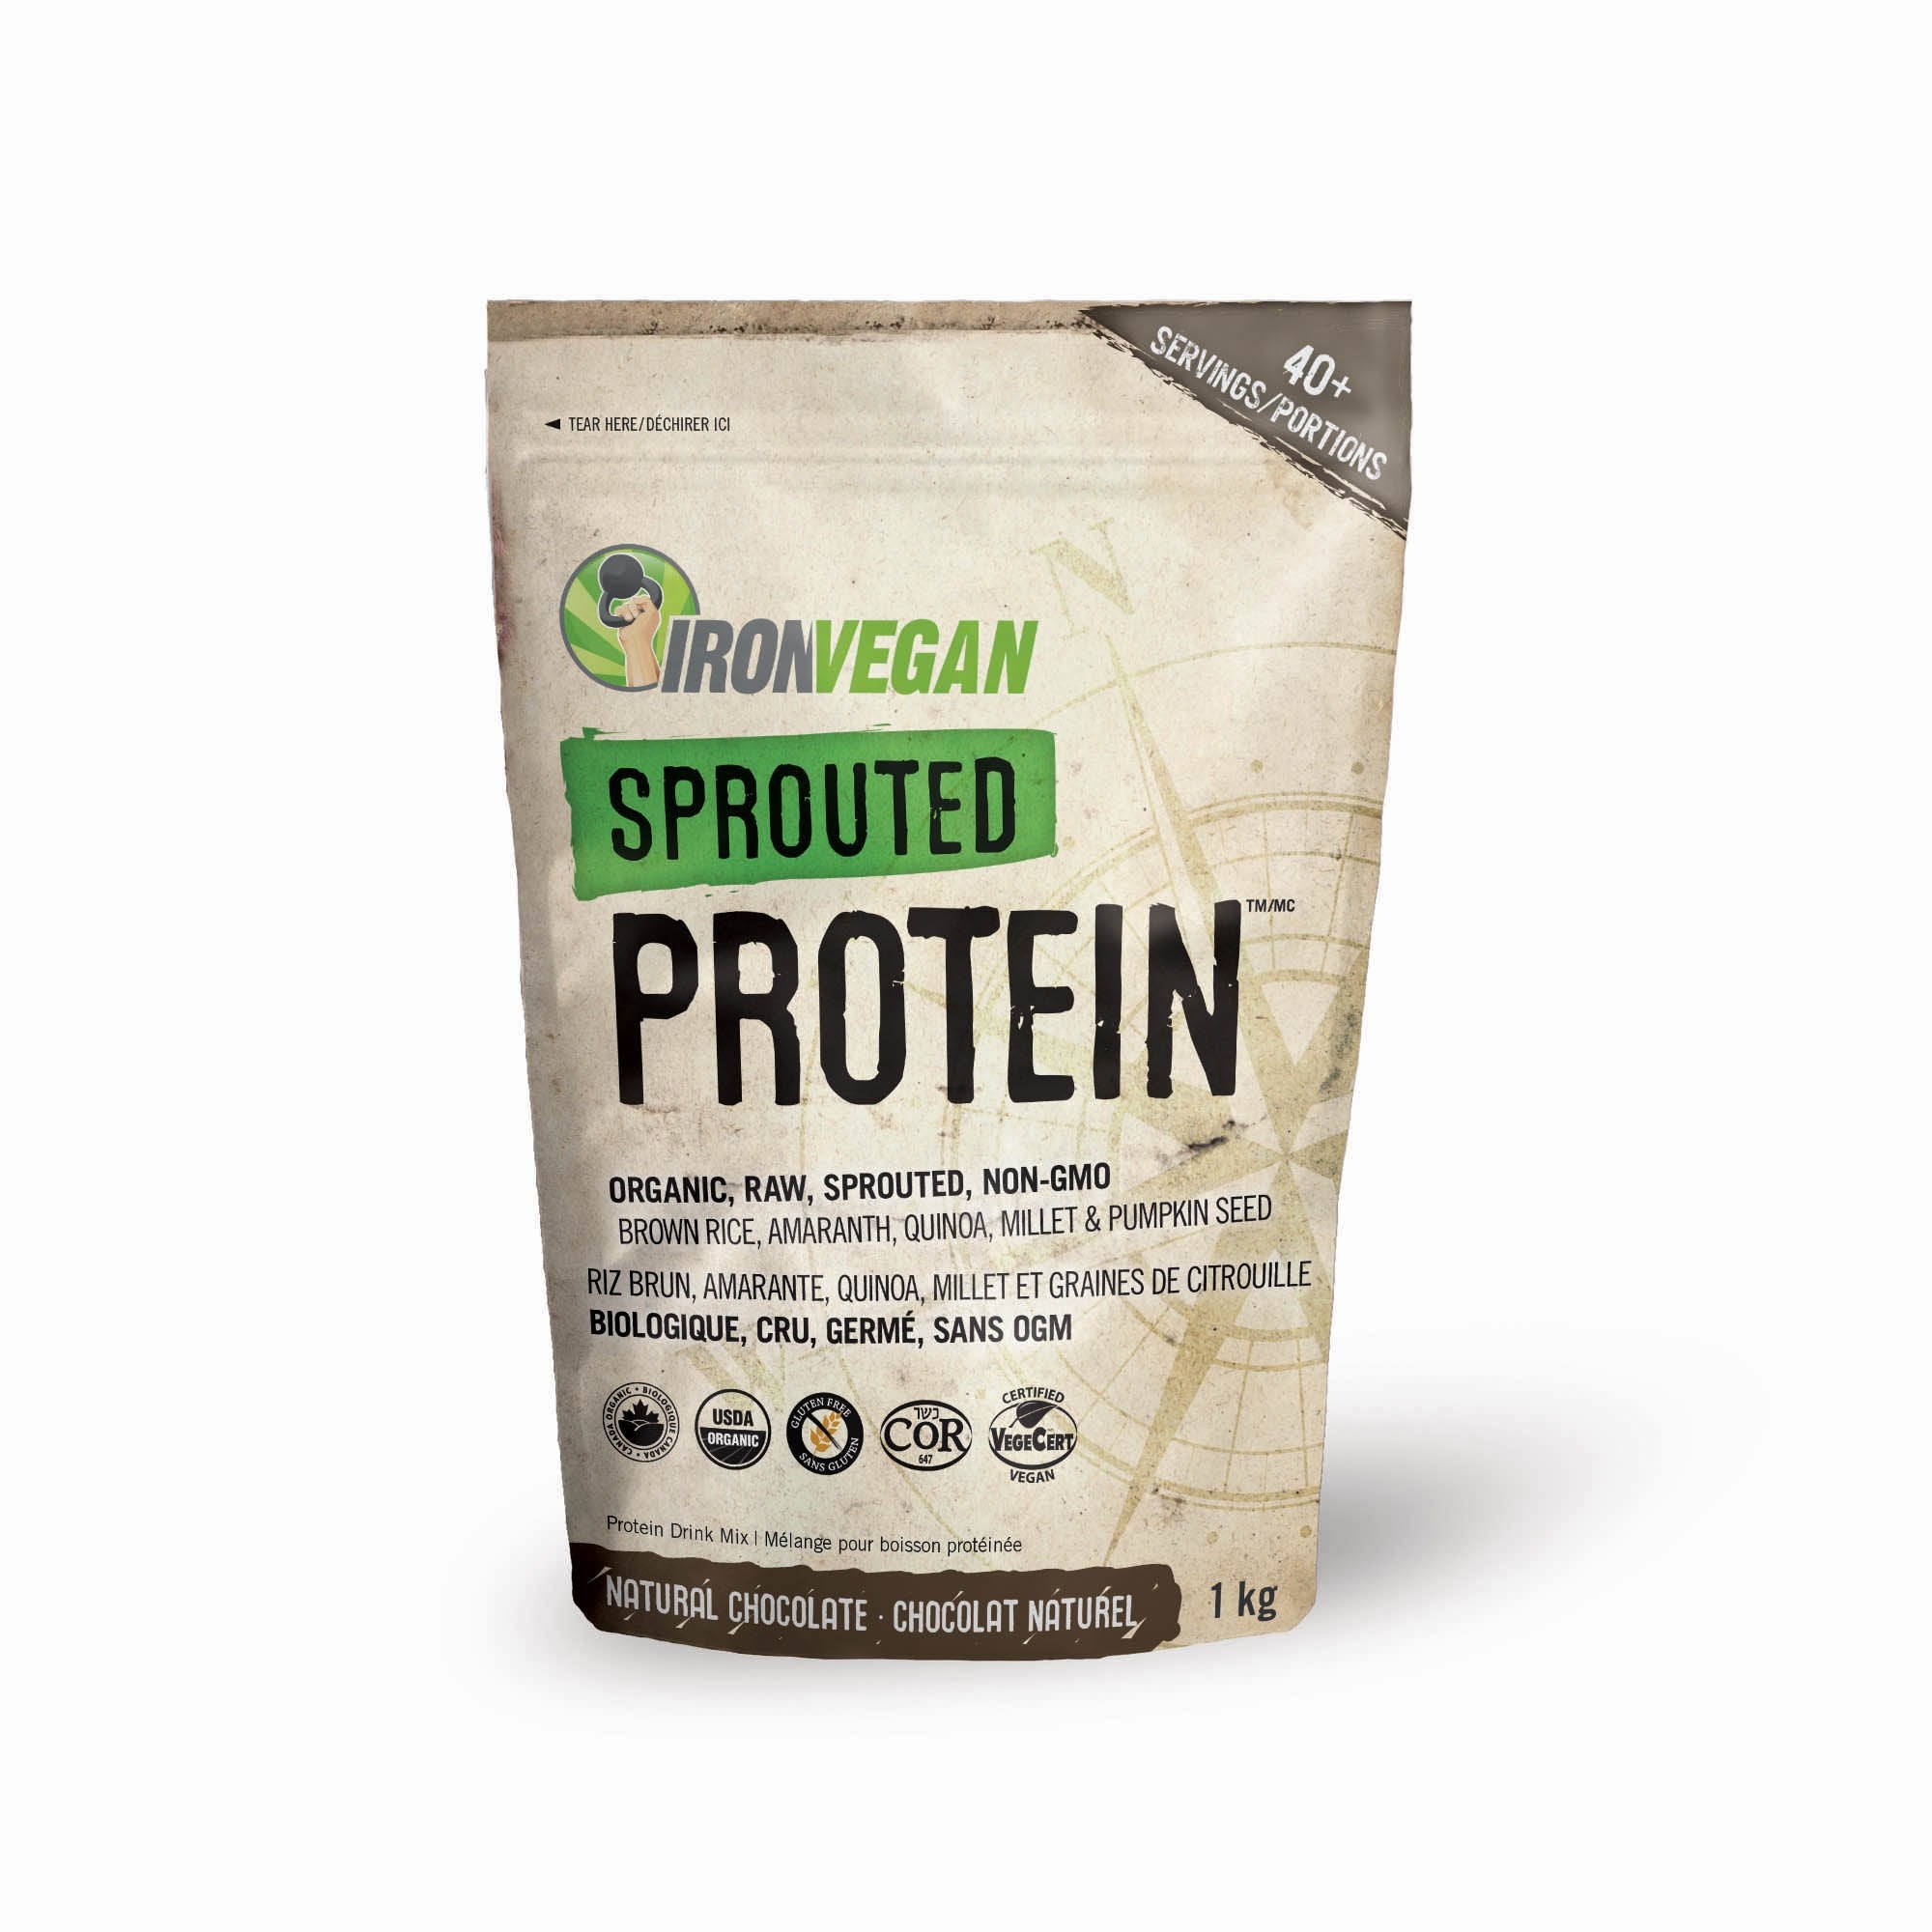 Iron Vegan Sprouted Protein Chocolate 1 Kg